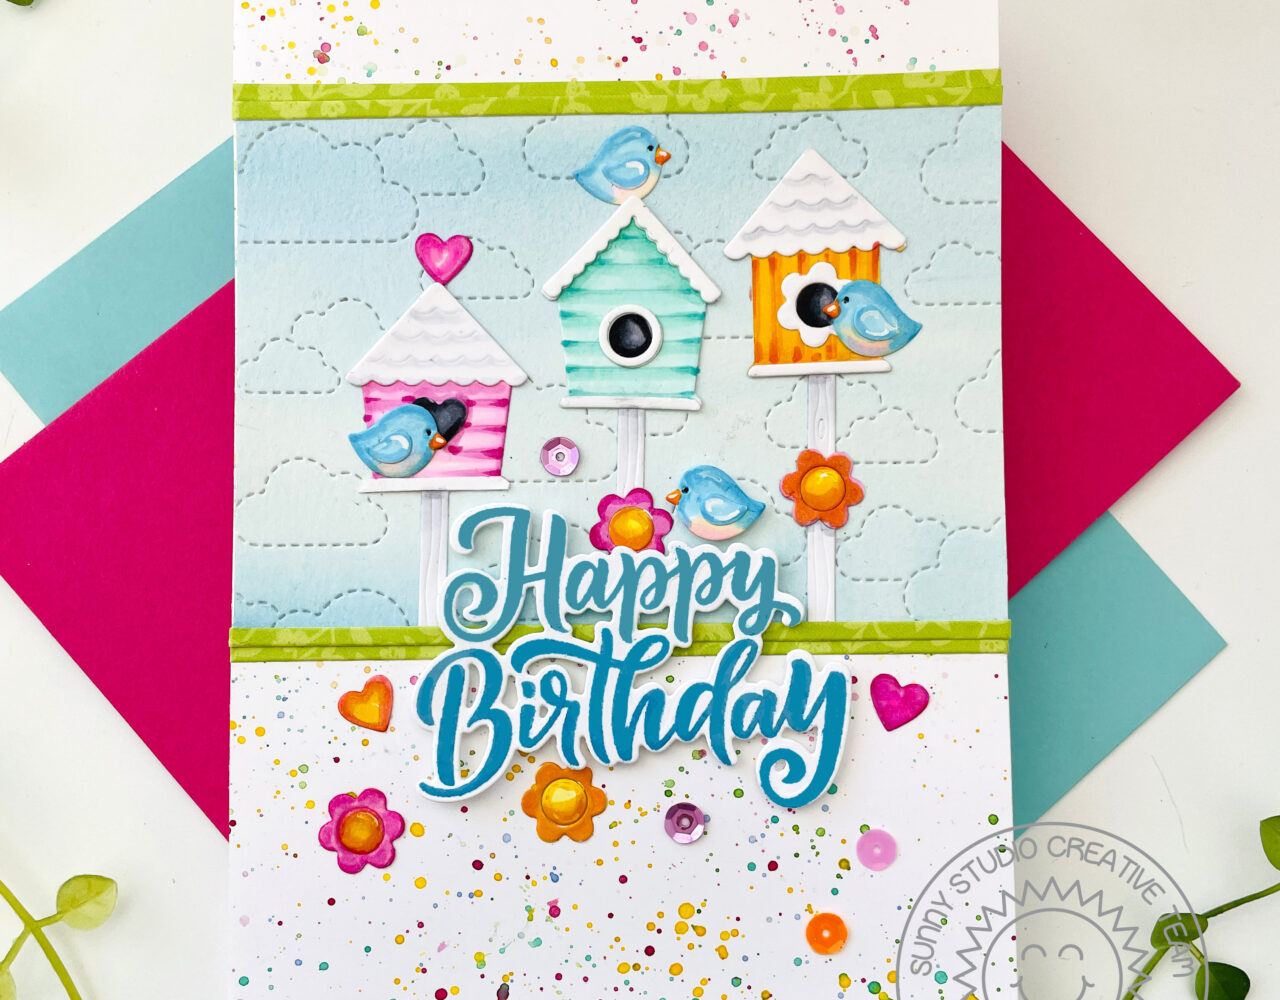 Build a Birdhouse by Sunny Studio Stamps